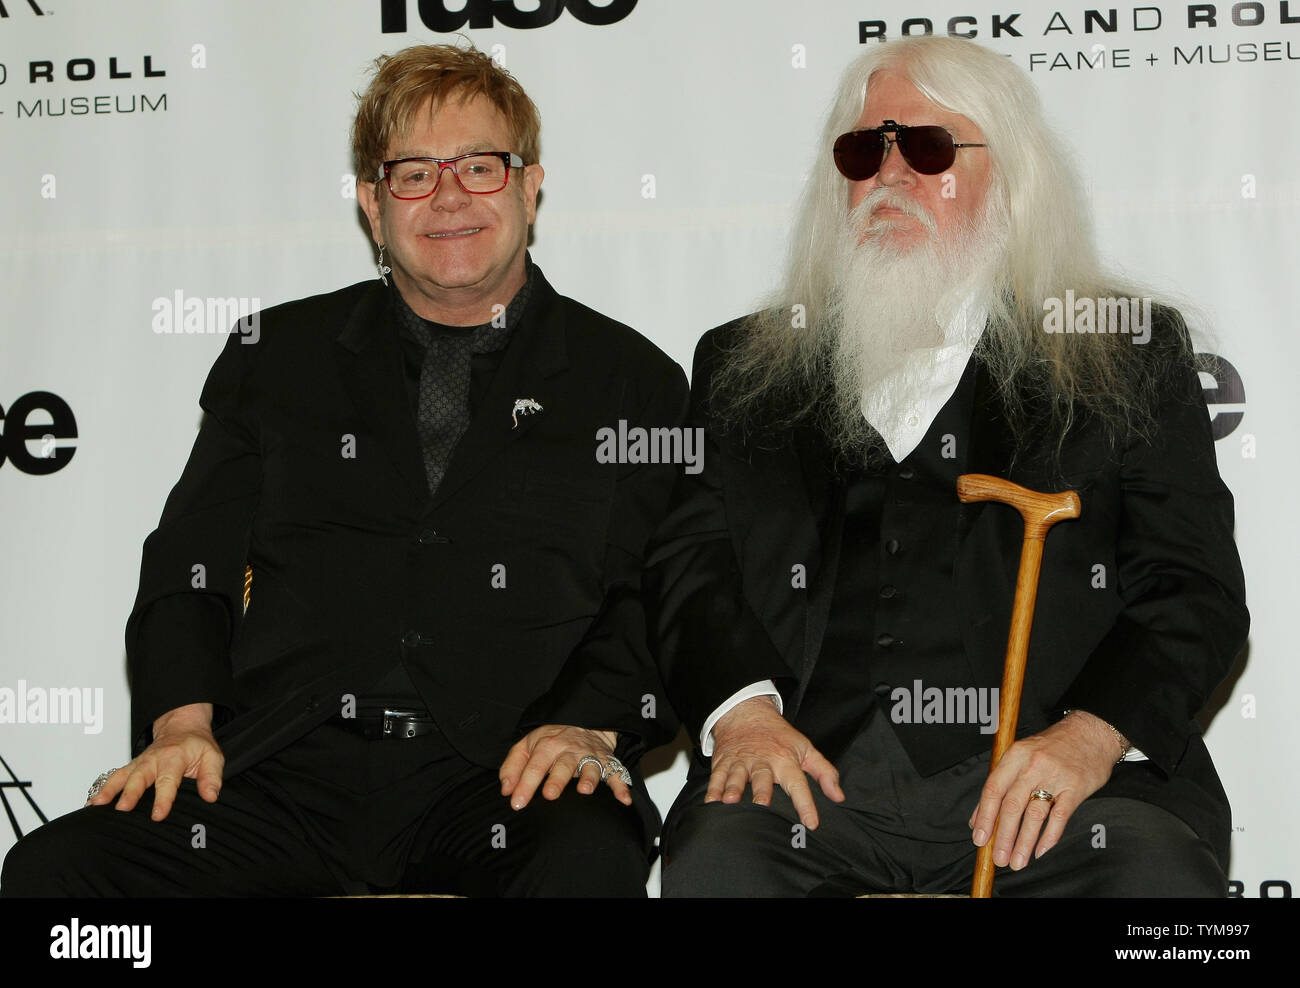 Elton John (L) answers reporters' questions as inductee Leon Russell at the Rock and Roll Hall of Fame induction ceremony held at the Waldorf-Astoria hotel in New York on March 14, 2011.      UPI Photo/Monika Graff... Stock Photo